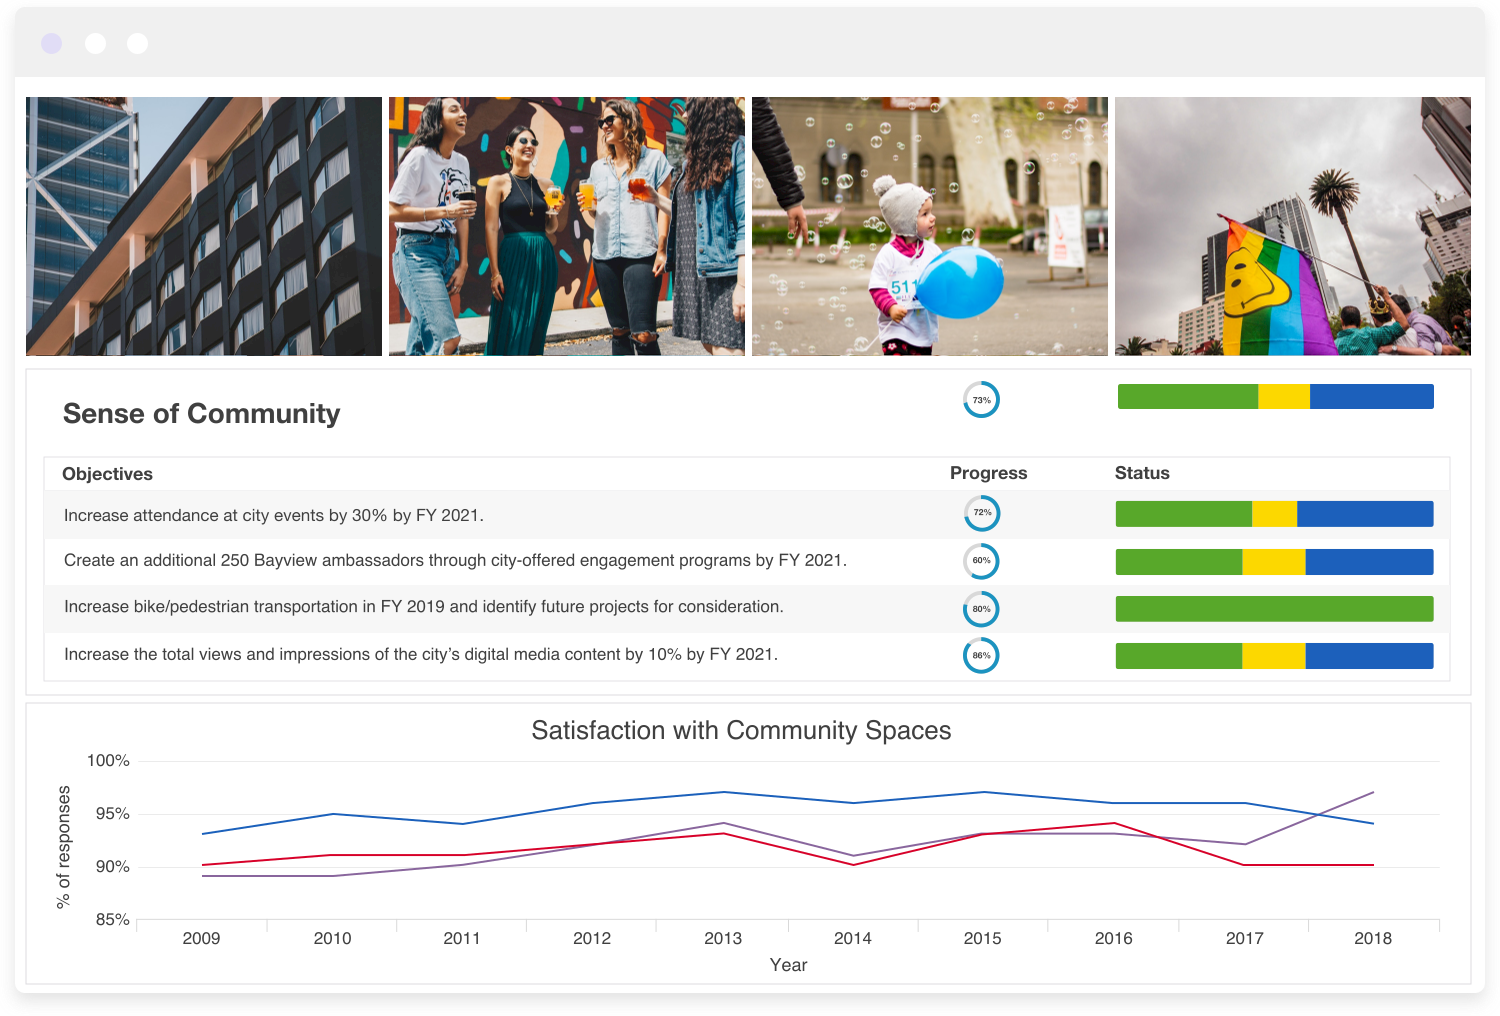 Share your performance story. Our customizable community dashboards are fully ADA compliant. Build trust and manage expectations with dashboards for each plan or department to inform staff, partners, volunteers, or your community.